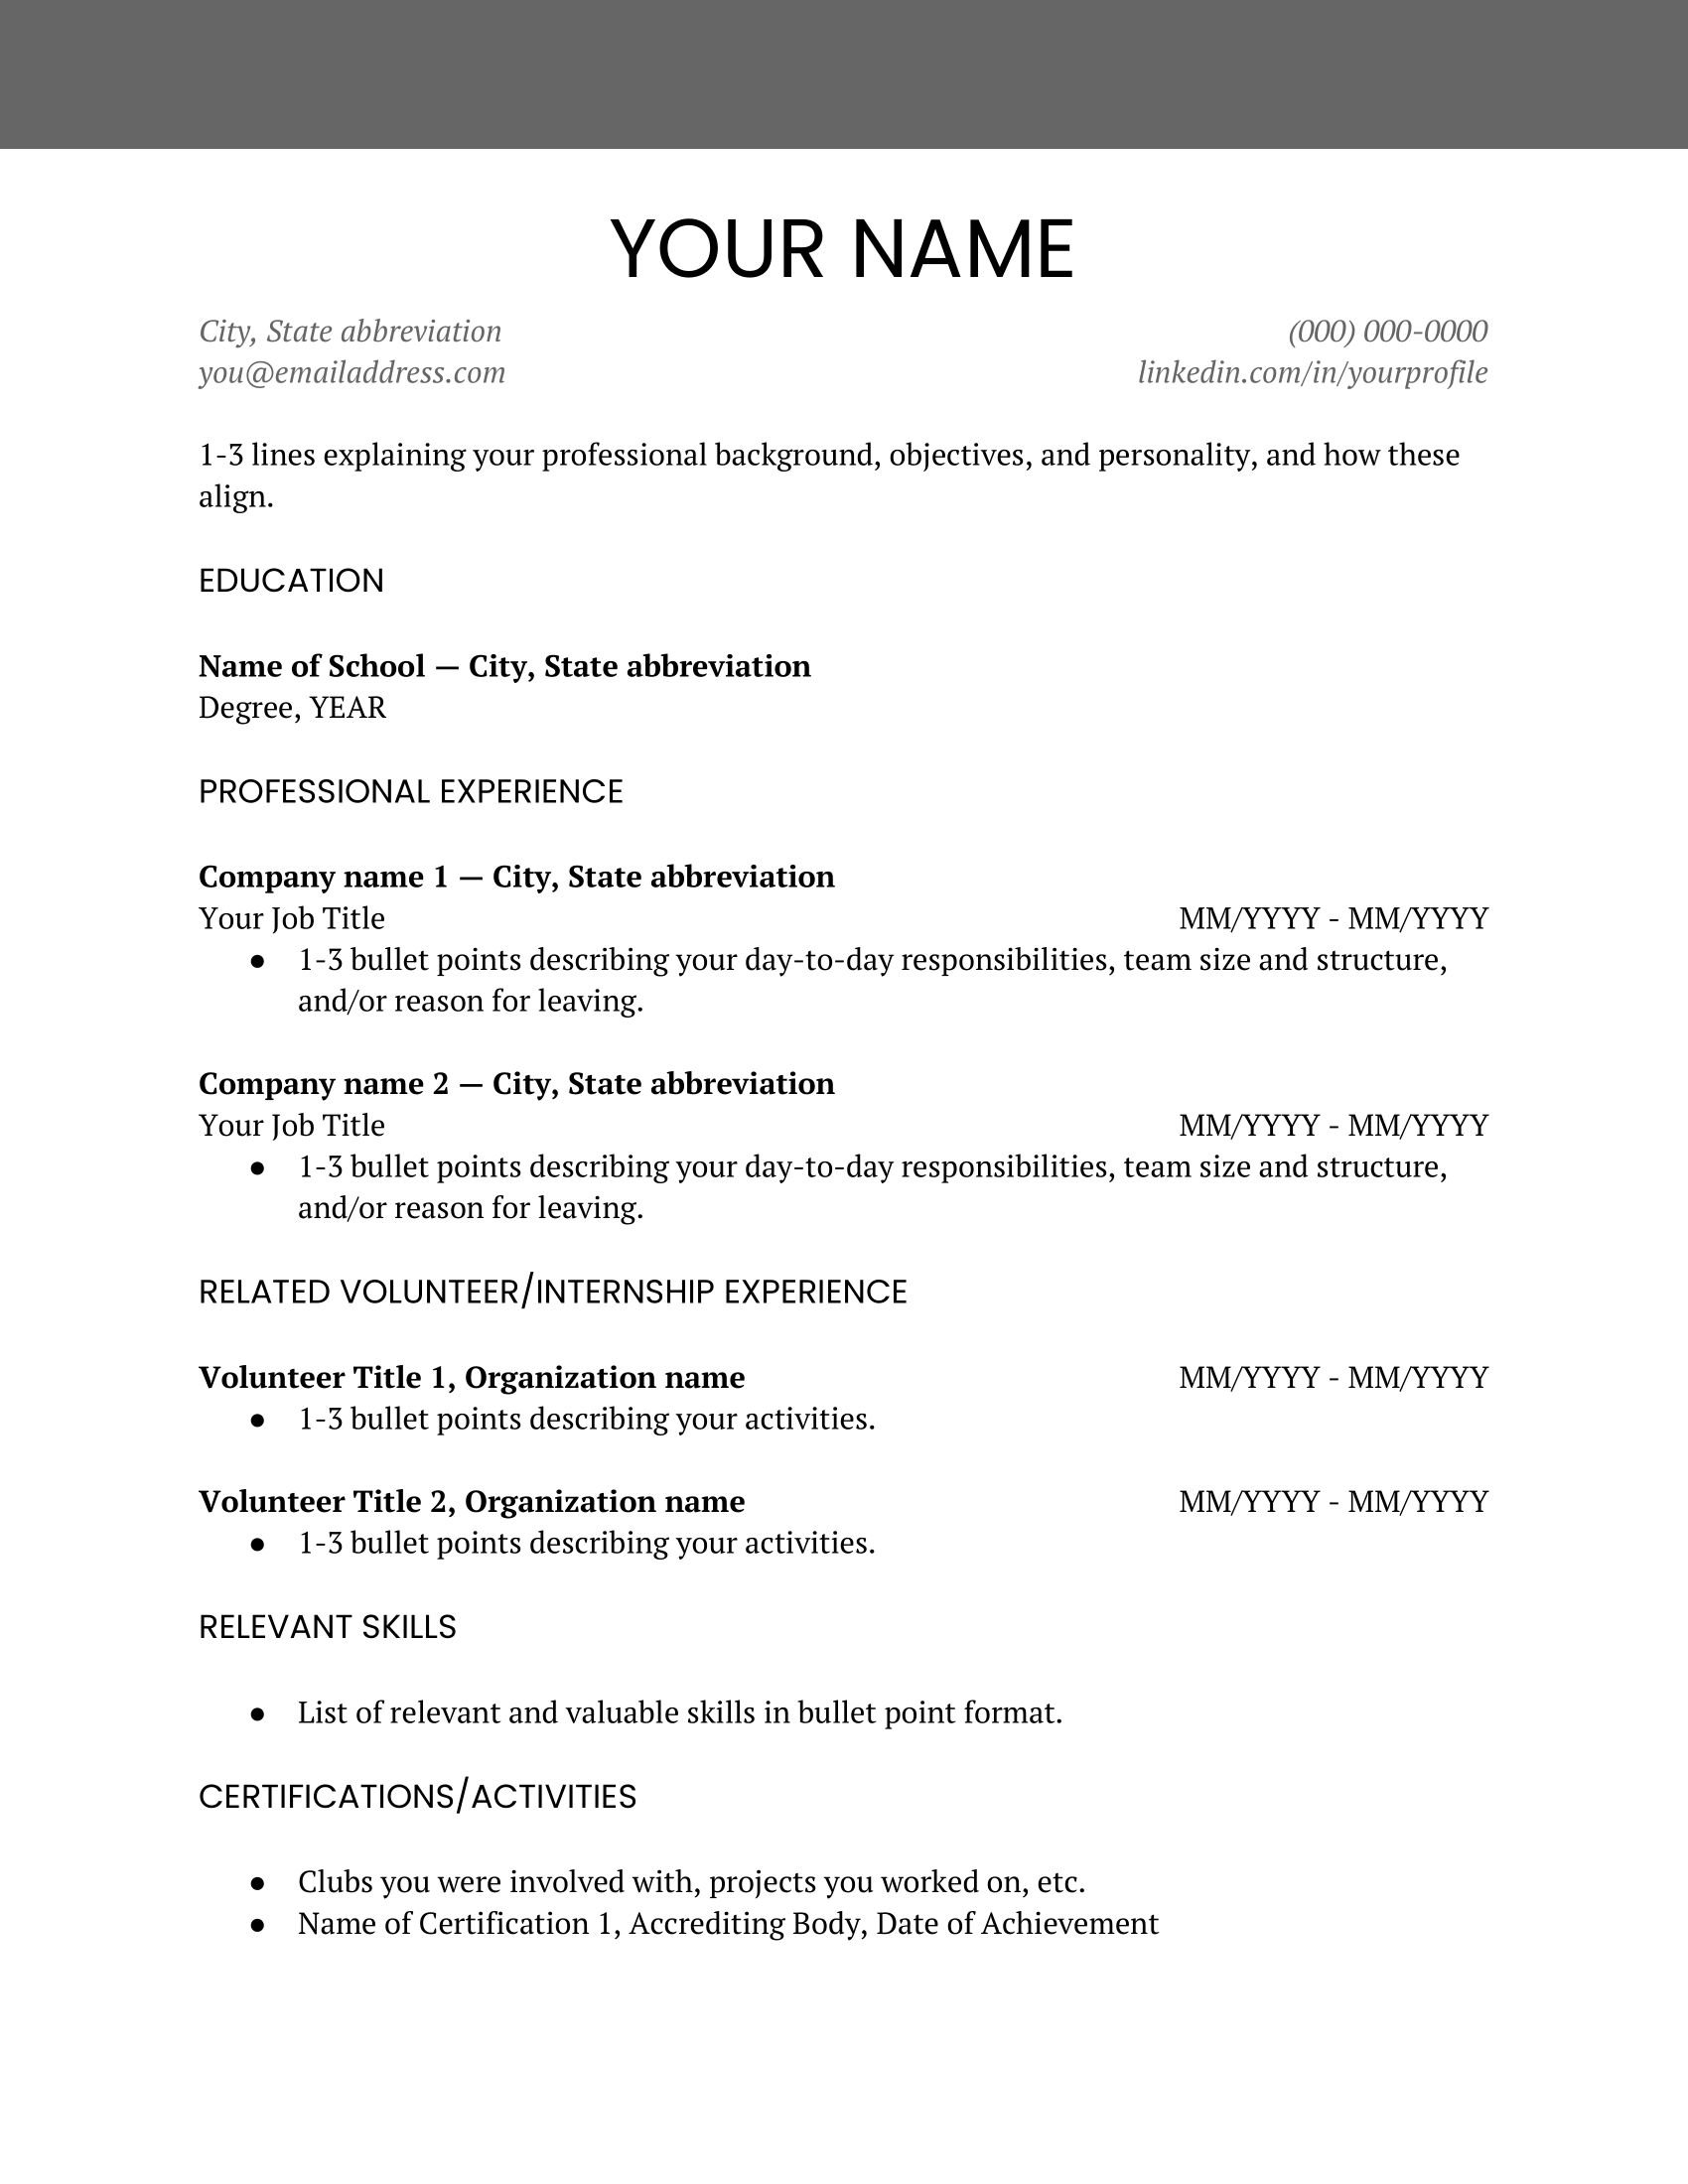 Image of Resume Template